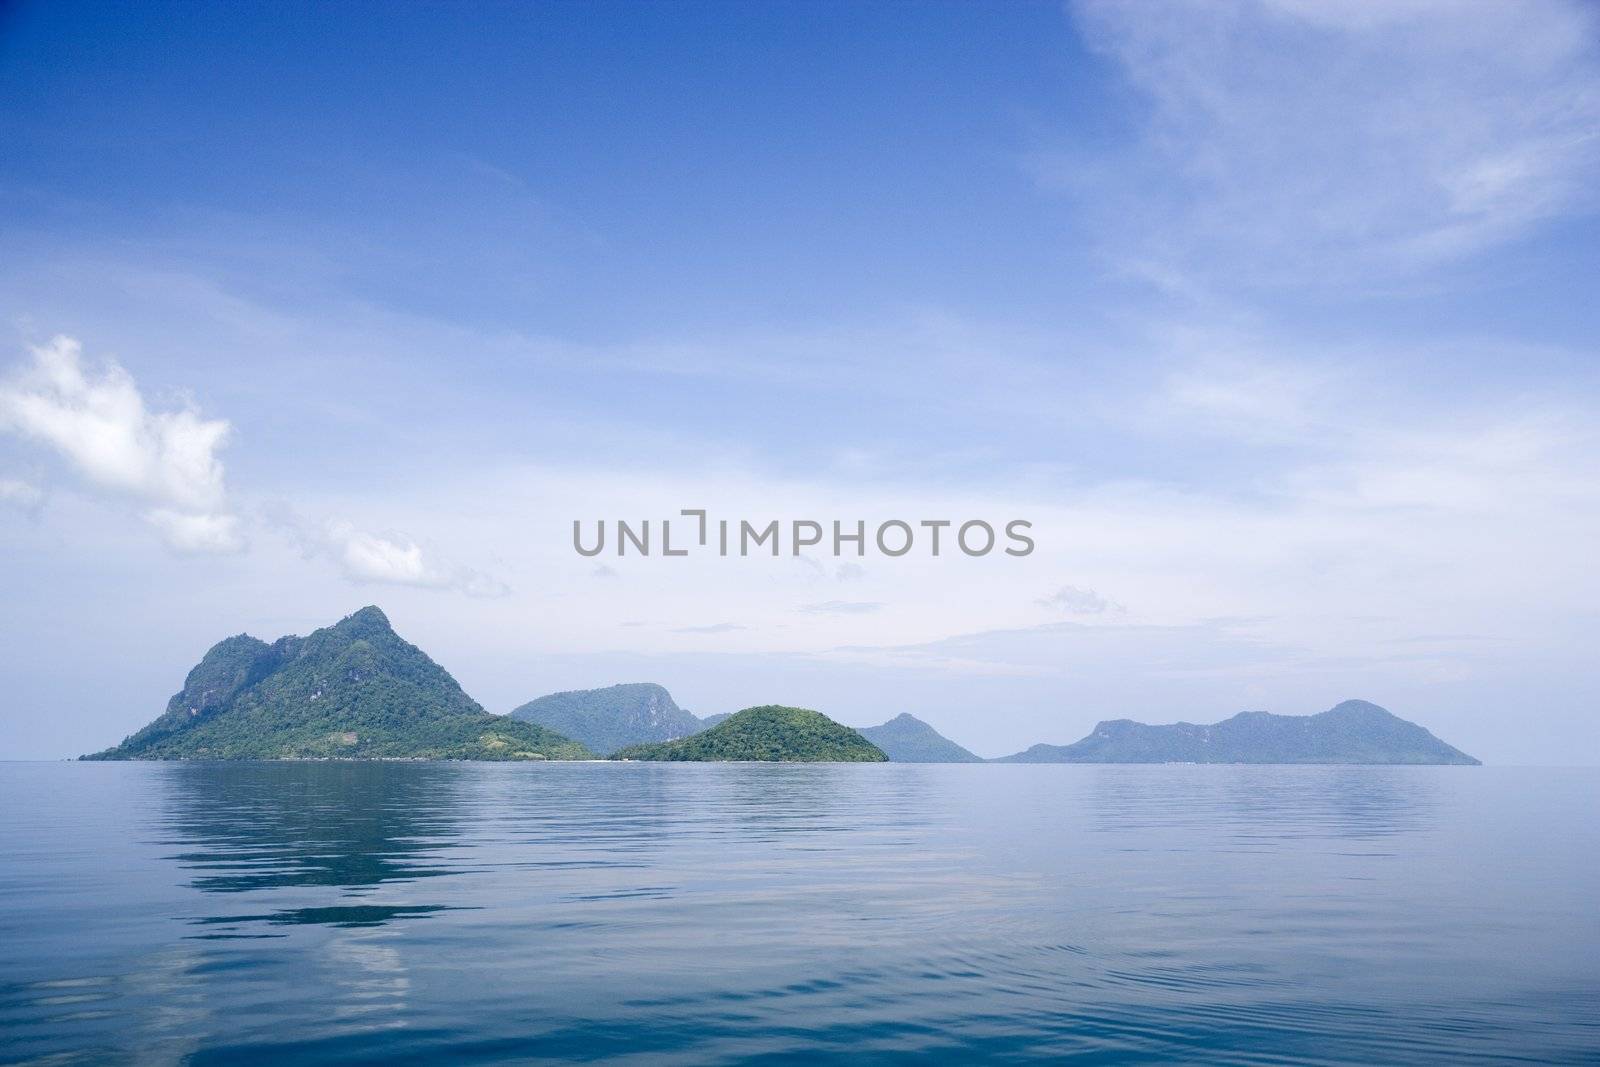 Image of remote Malaysian tropical islands that were formerly the rim of a volcano, now extinct.